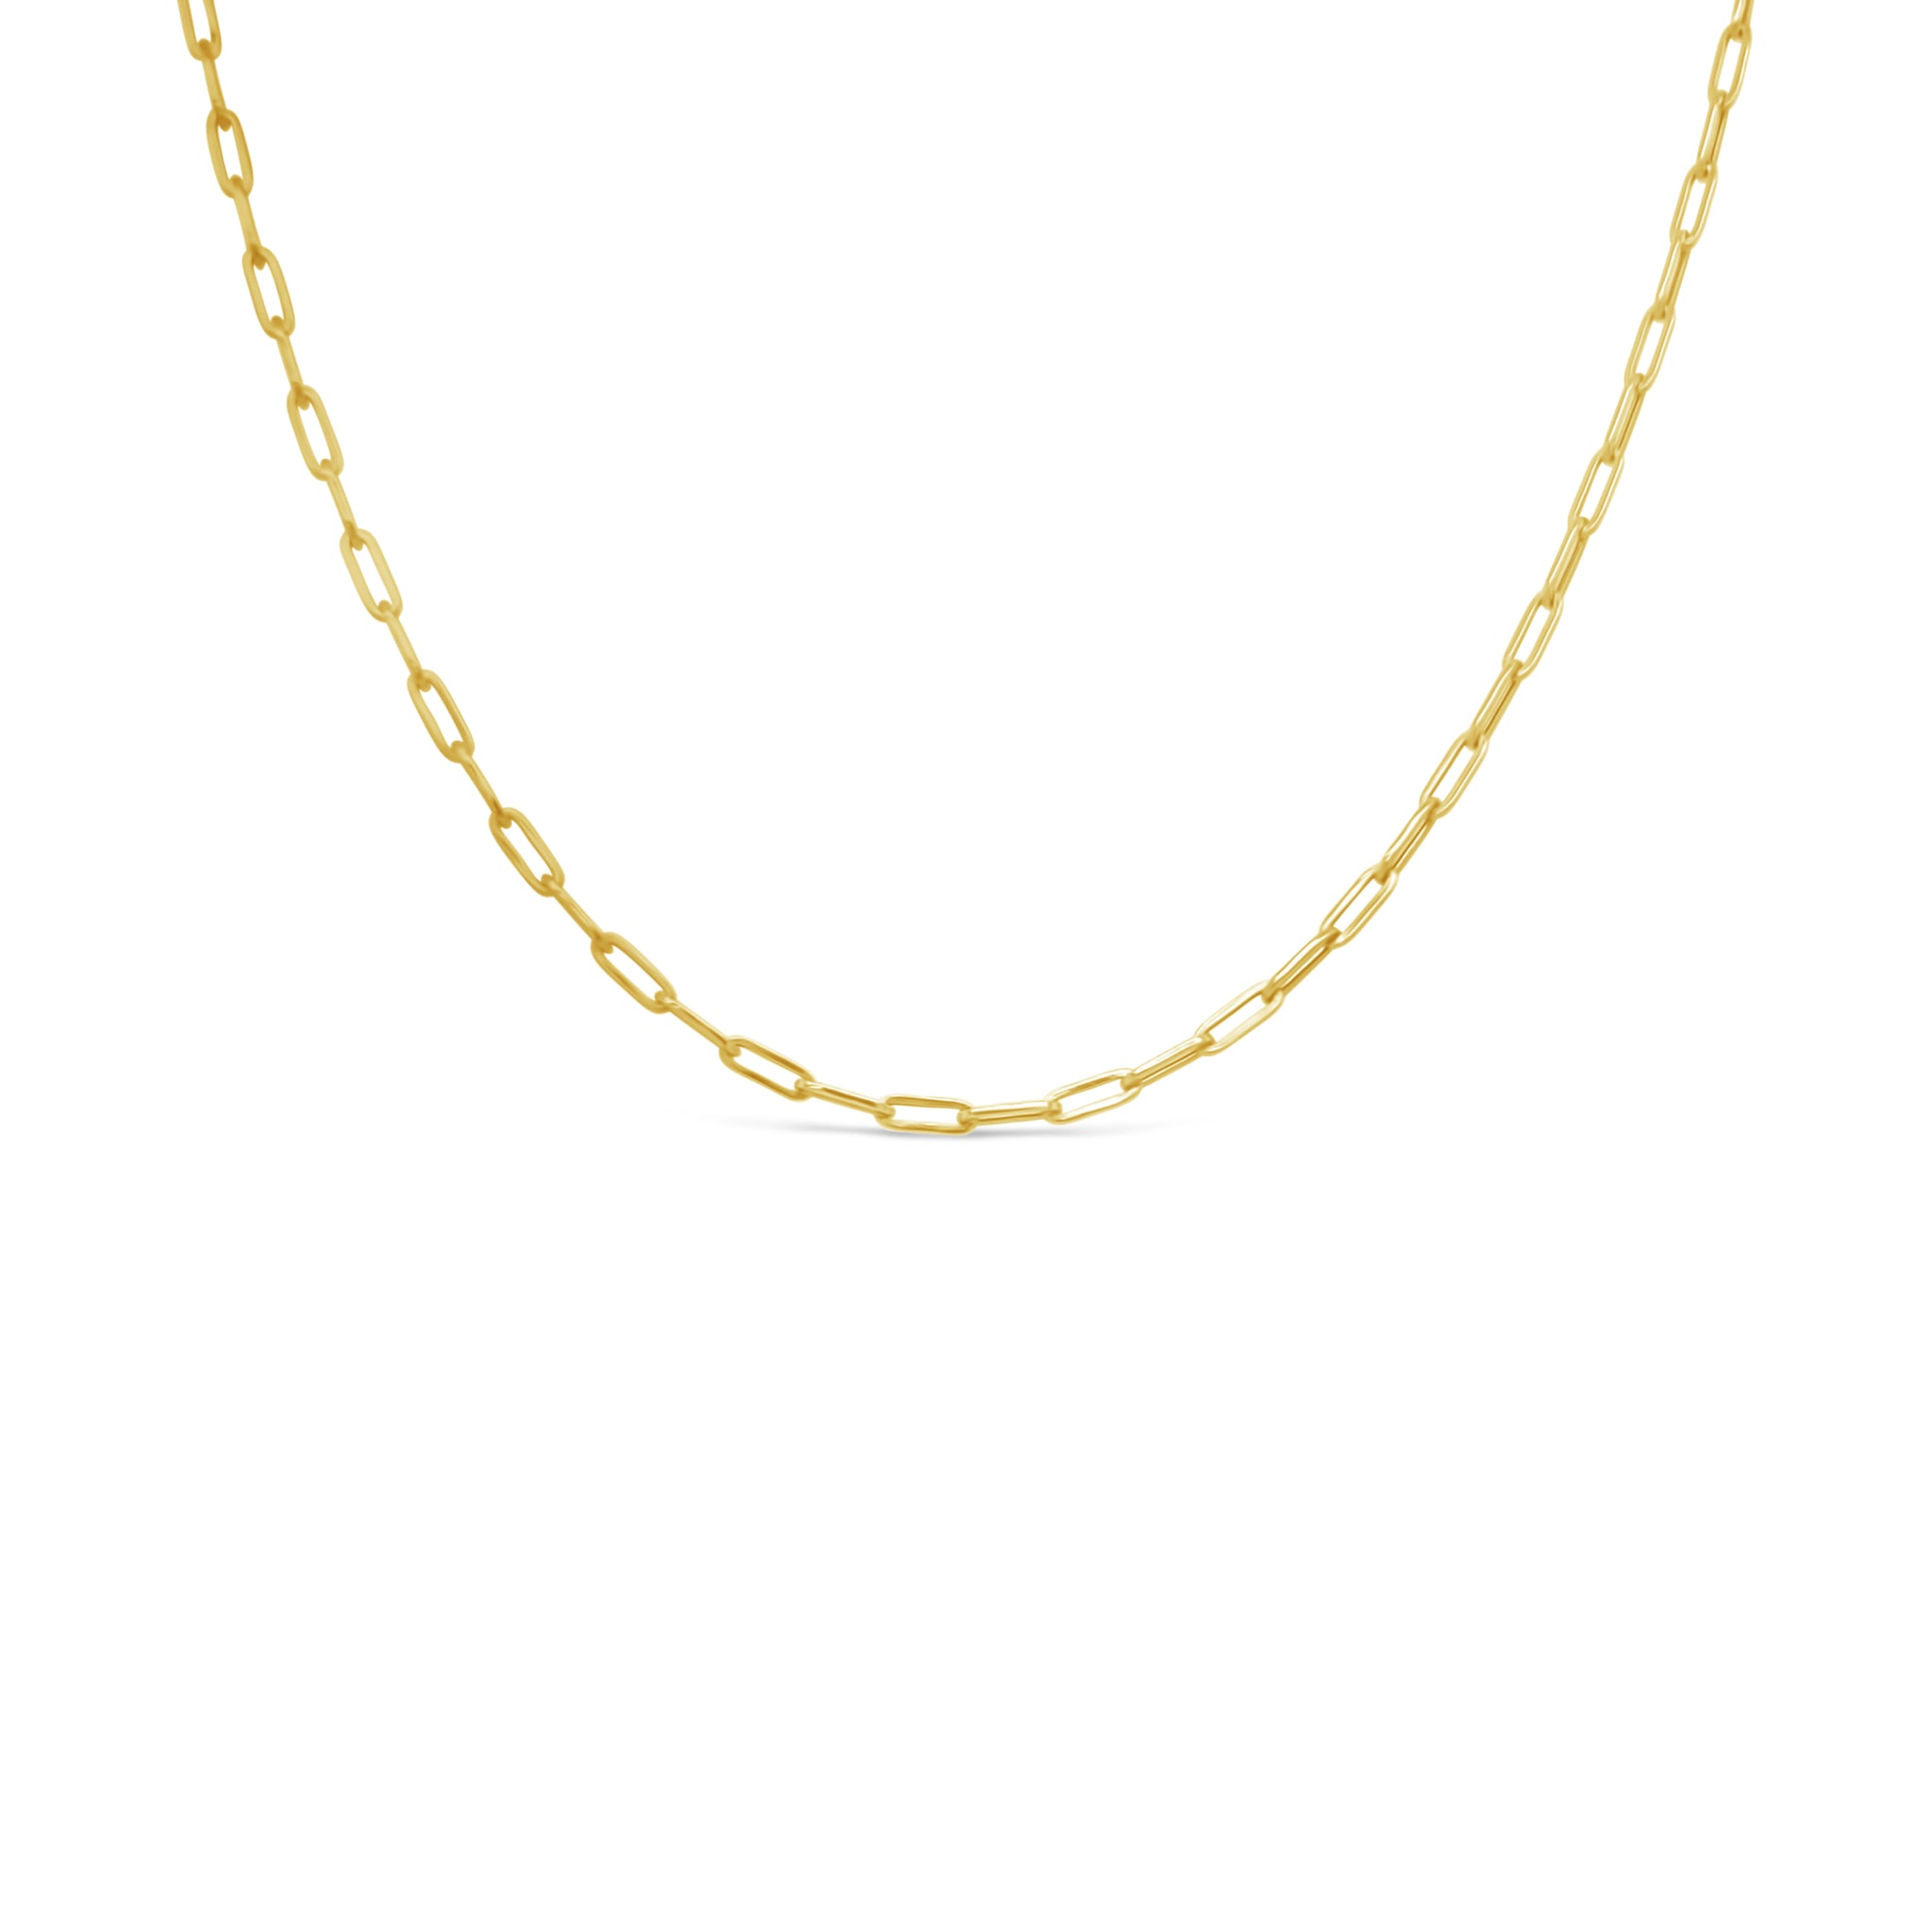 18K Yellow Gold Paperclip Chain Necklace